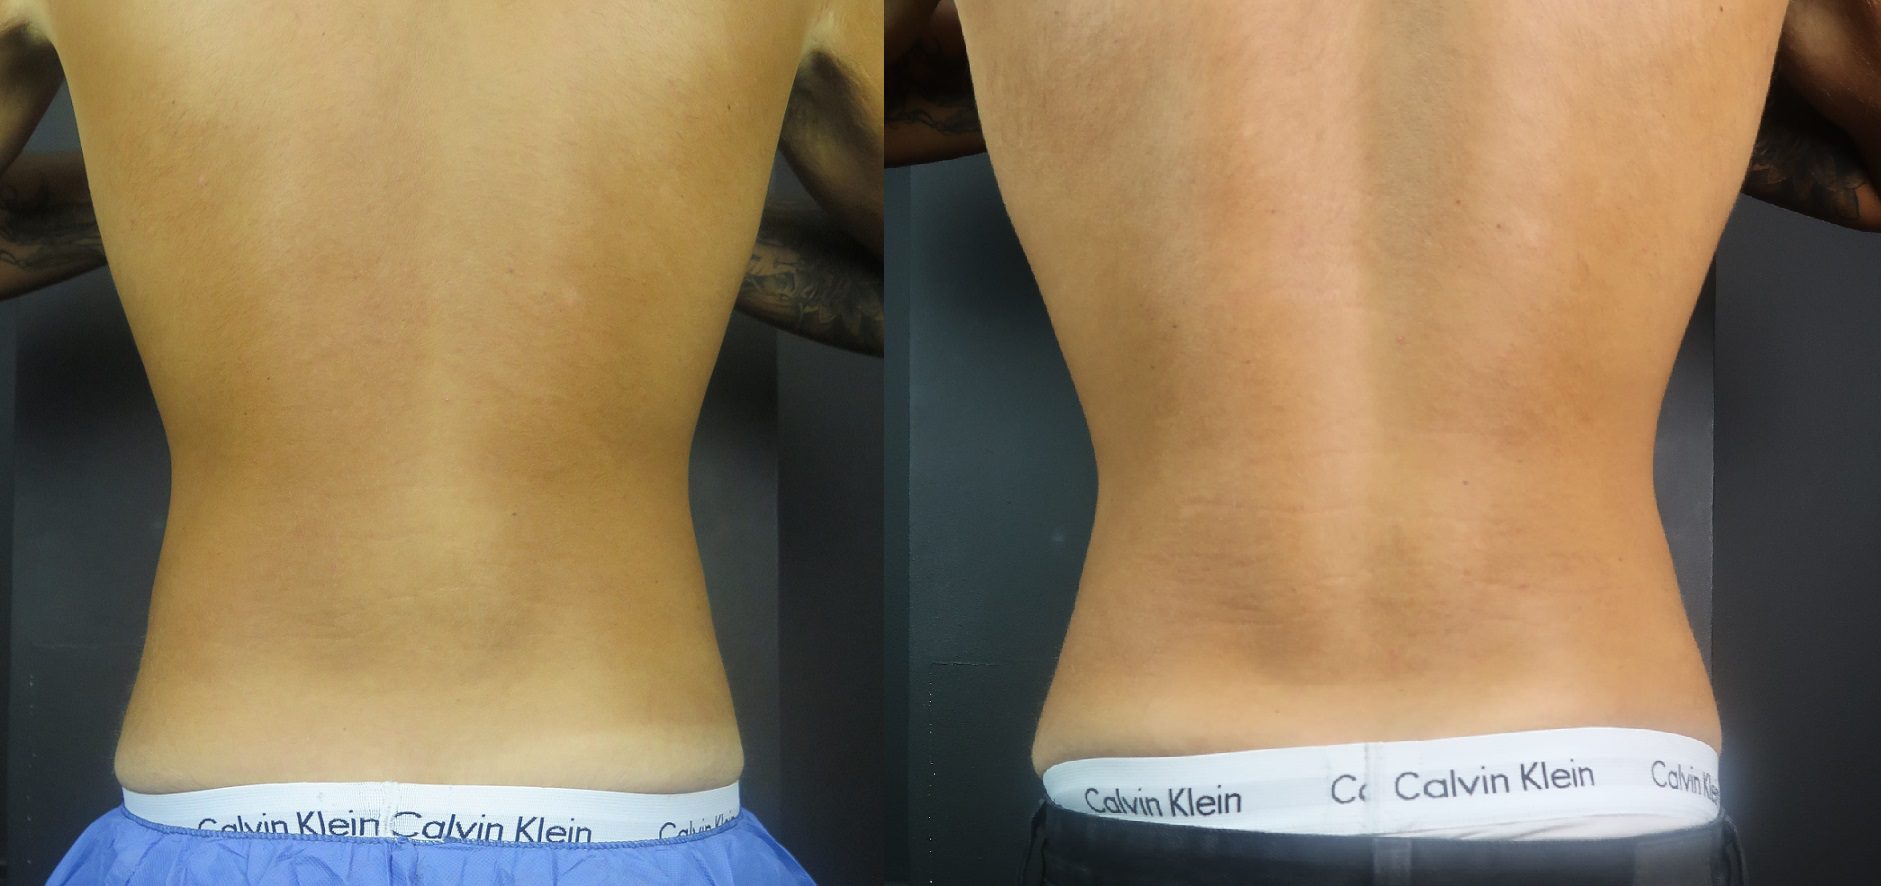 coolsculpting fat freezing flanks before and after